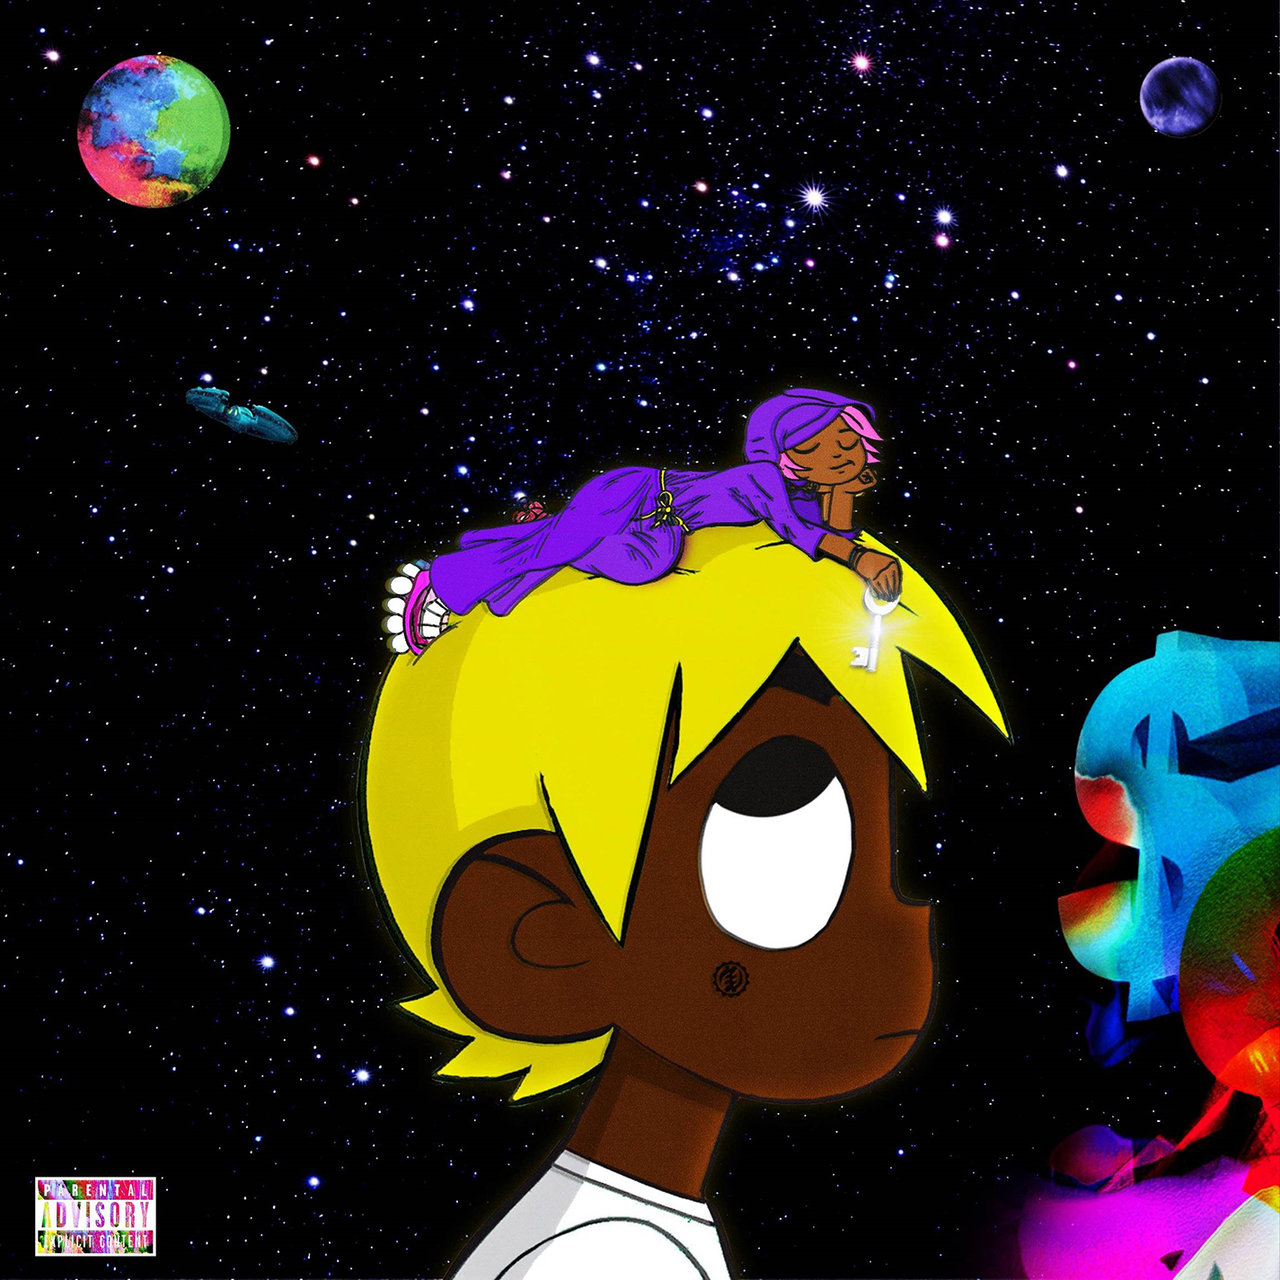 Lil Uzi Vert - Eternal Atake (Deluxe) - LUV Vs. The World 2 (Cover)